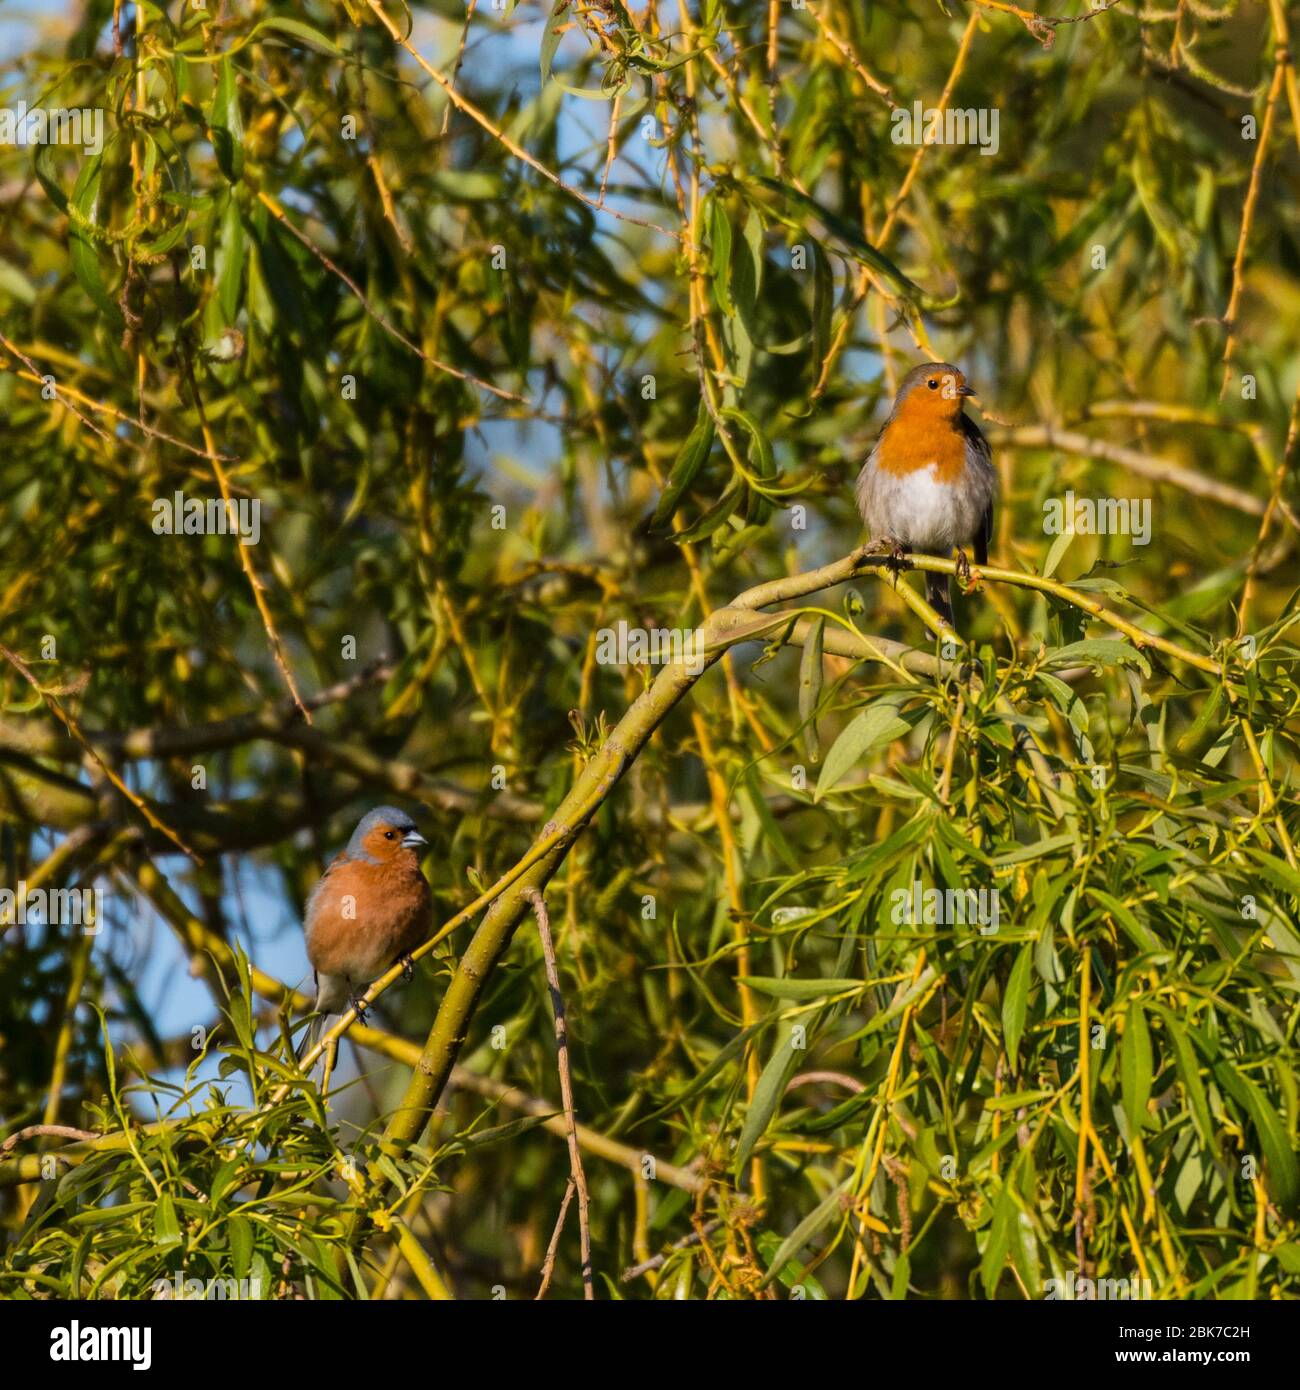 A Robin (Erithacus rubecula) and a Male Chaffinch (Fringilla coelebs) in the uk Stock Photo